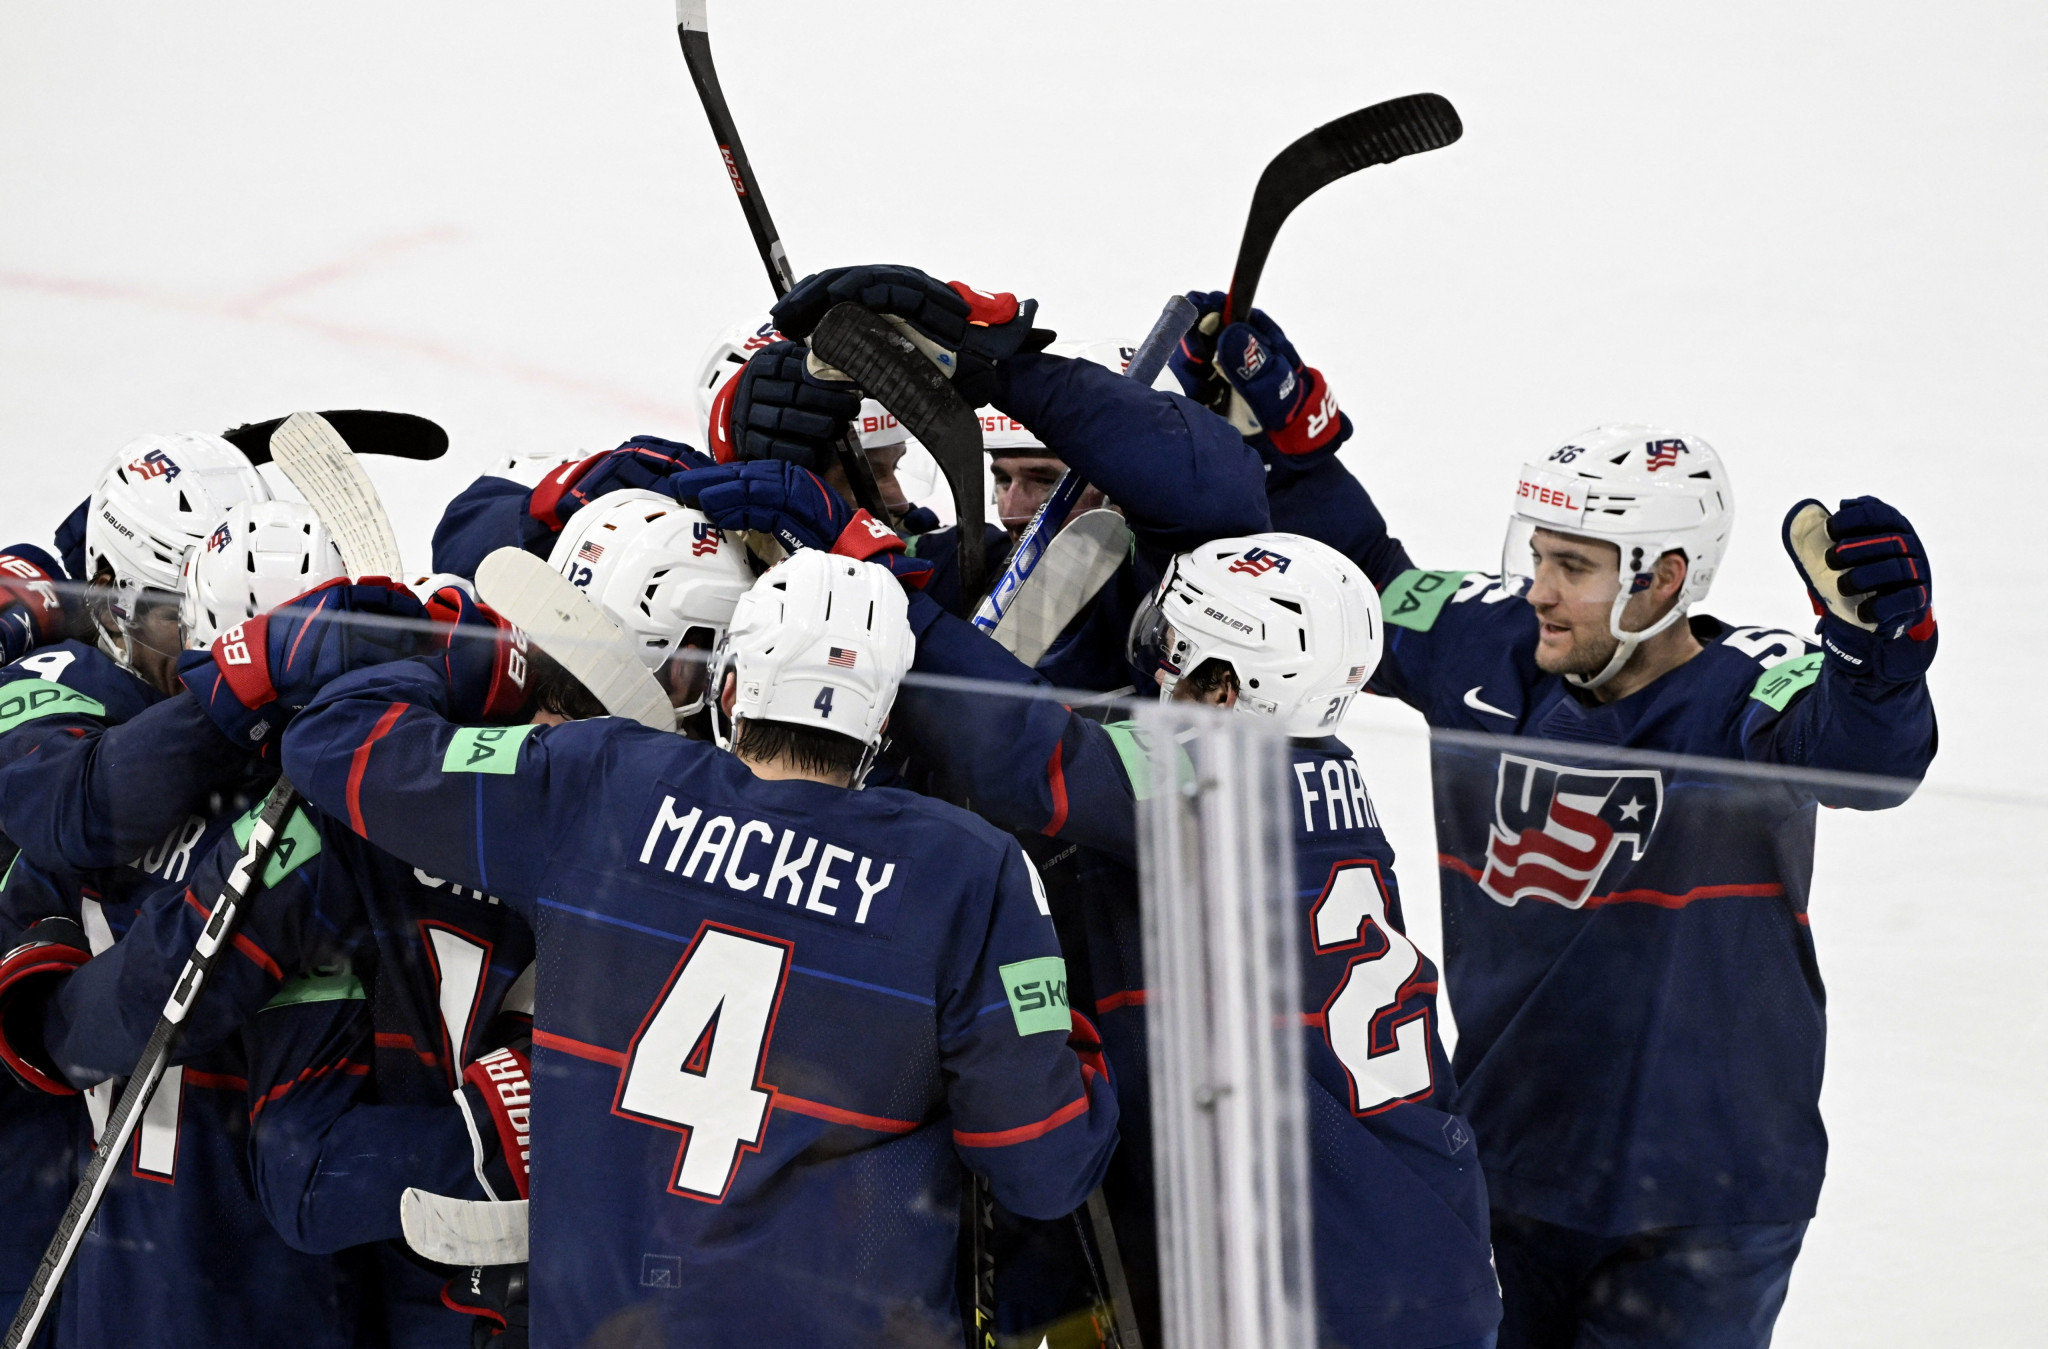 United States saw off Sweden in overtime of a top-of-the-table clash to win Group A in Tampere ©Getty Images